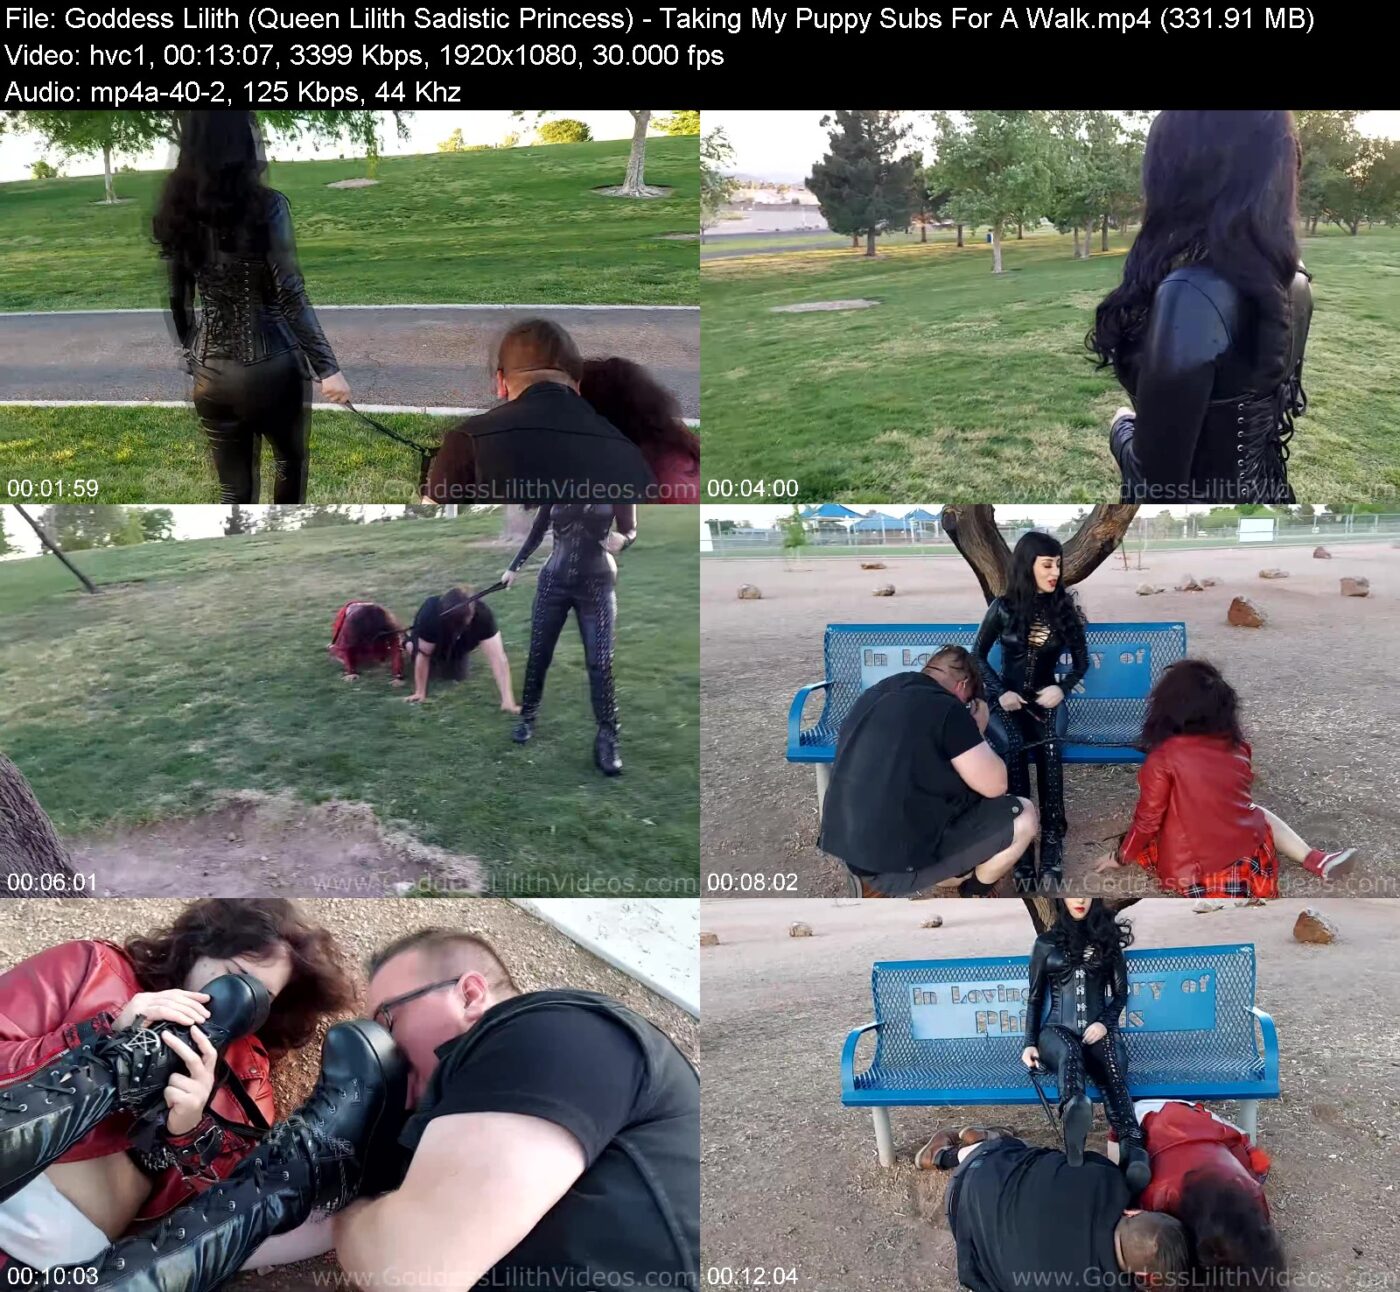 Actress: Goddess Lilith (Queen Lilith Sadistic Princess). Title and Studio: Taking My Puppy Subs For A Walk